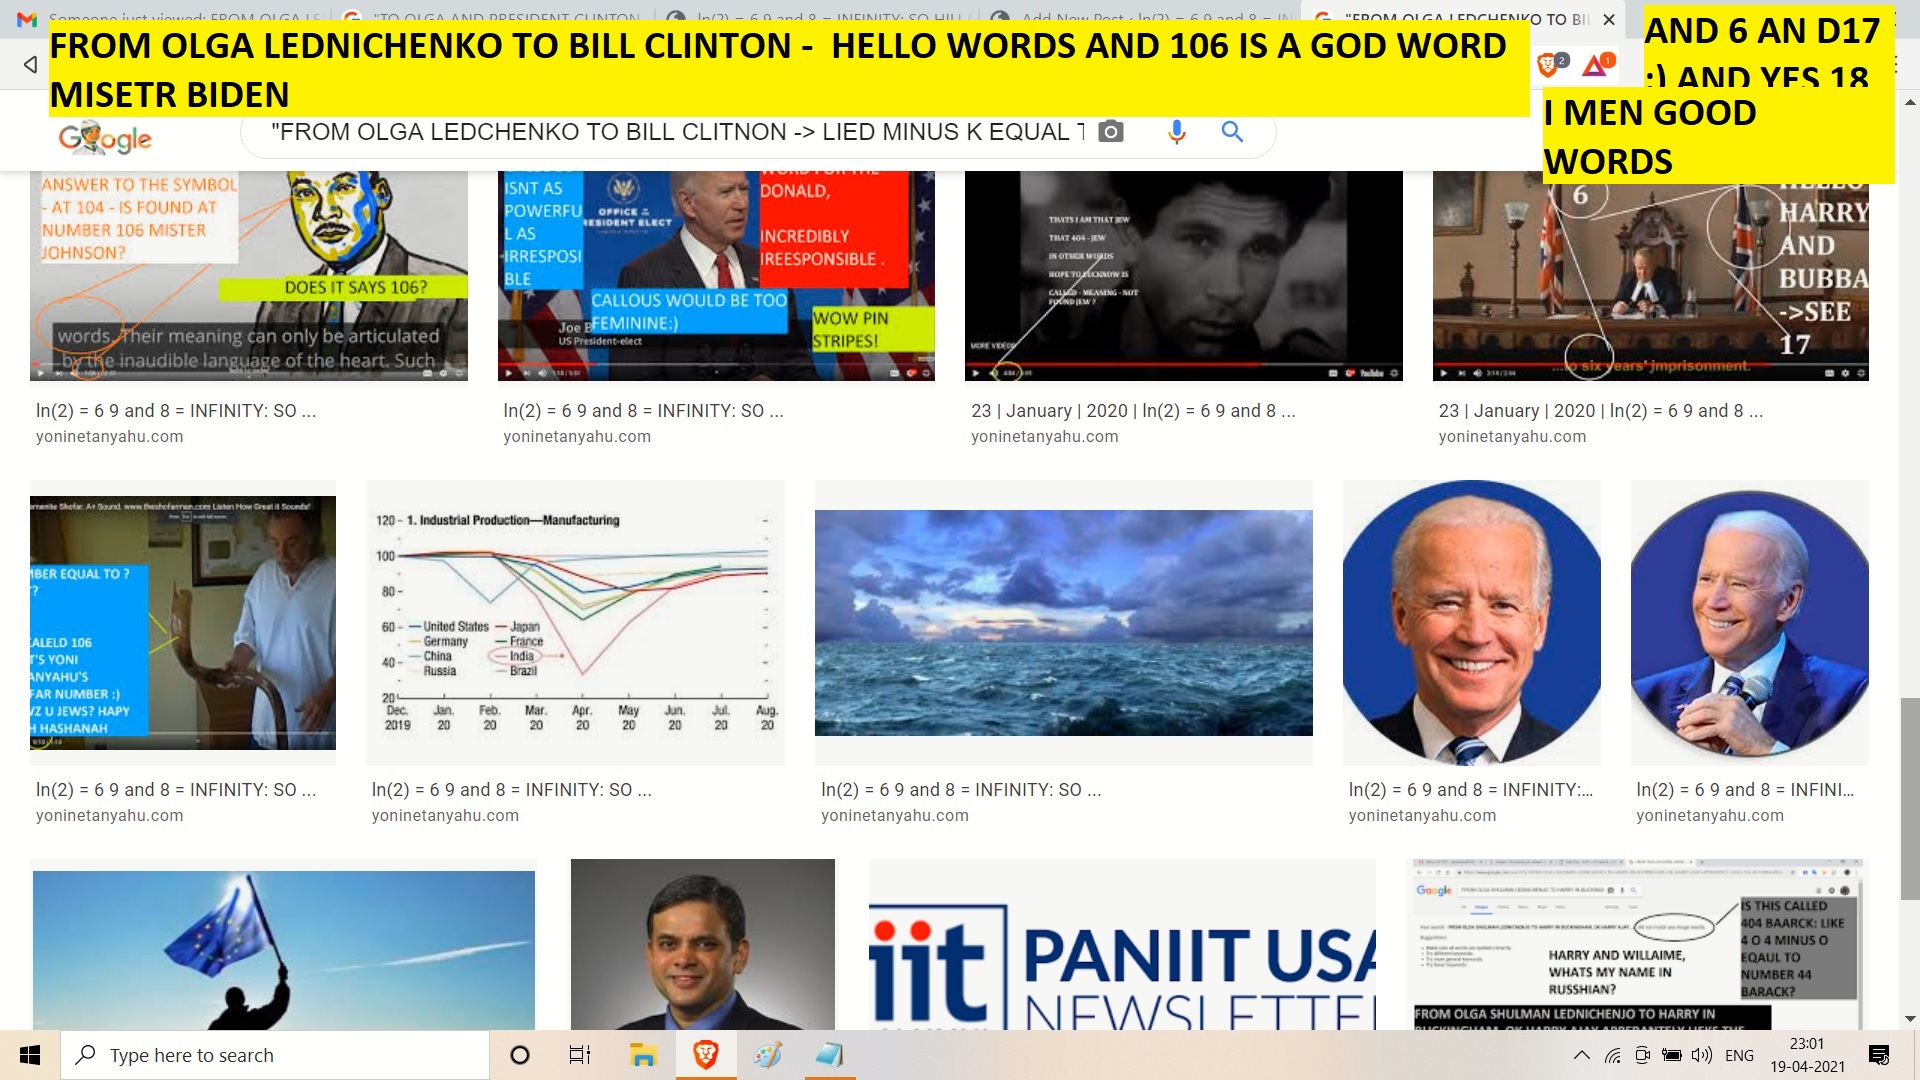 FROM OLGA LEDNICHENKO TO BILL CLINTON - HELLO WORDS AND 106 IS A GOD WORD MISETR BIDEN